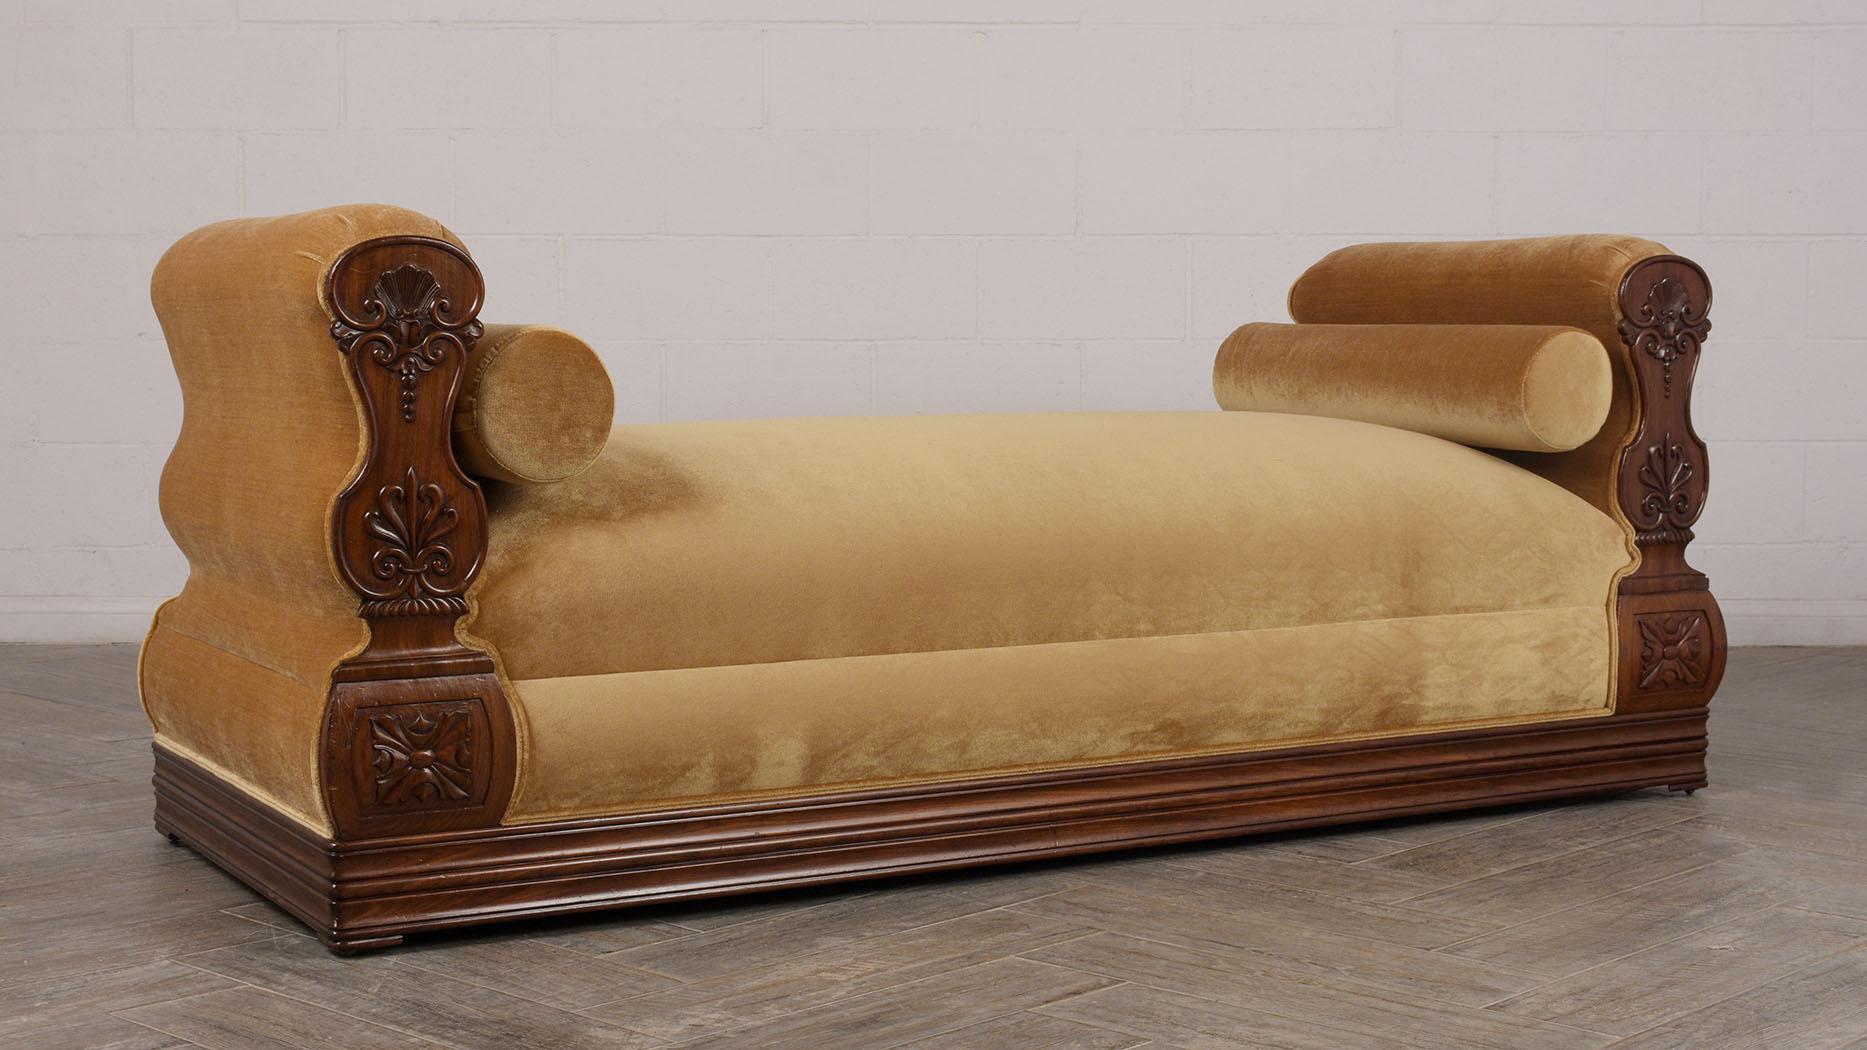 This circa 1840s Regency style daybed features hand carved mahogany wood panels and 4-inch thickness molding around the base original rich dark mahogany finish. The daybed has been newly upholstered in a gold-colored velvet fabric, comes with two